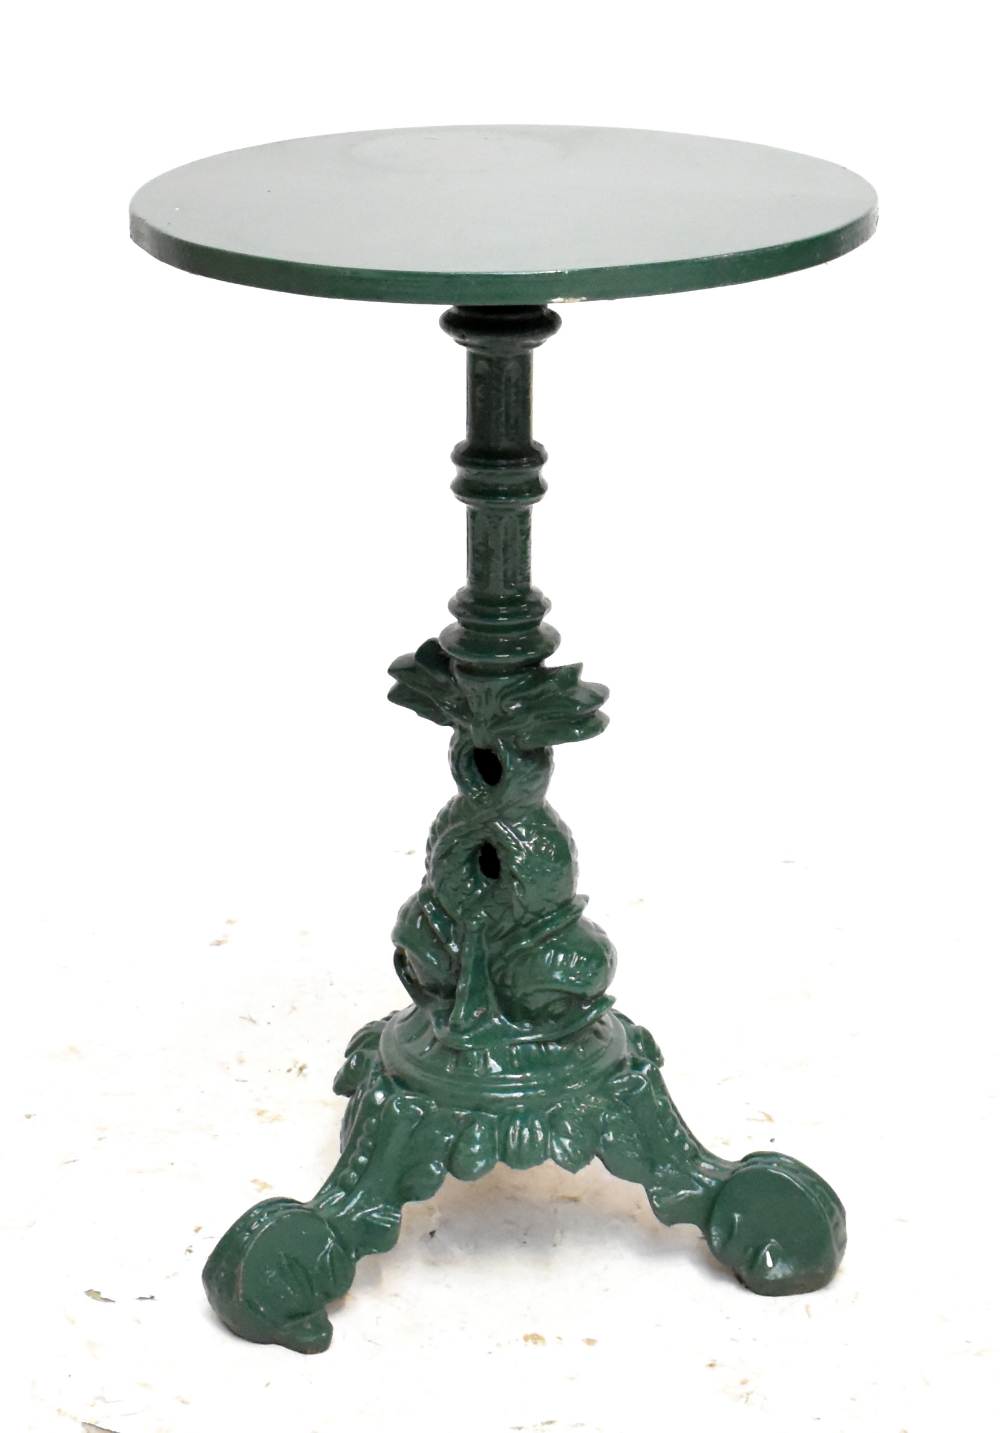 An early 20th century green painted cast iron garden table, with later wooden top, diameter 44cm.